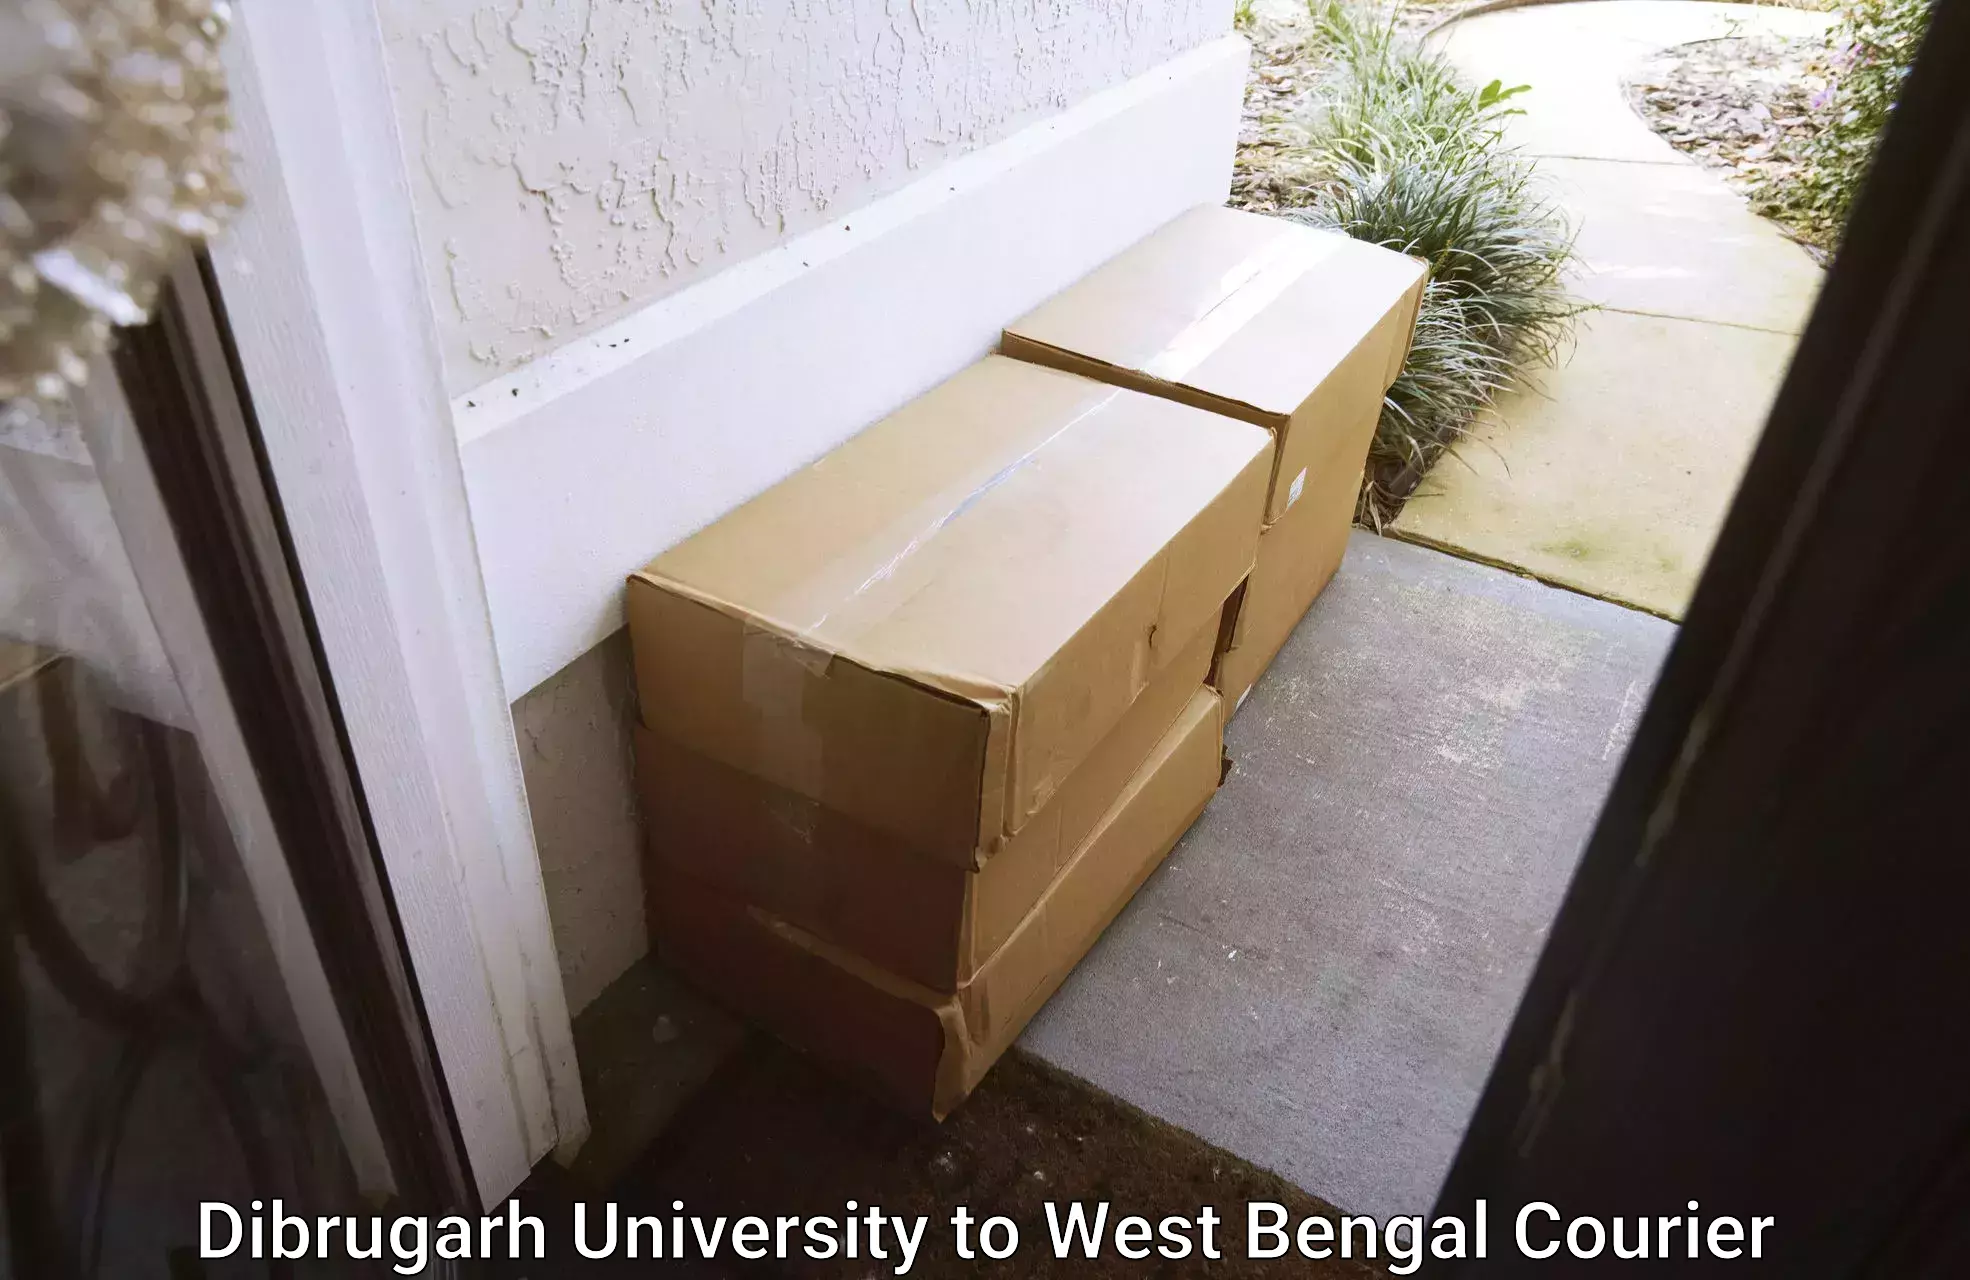 Specialized courier services in Dibrugarh University to Cossipore